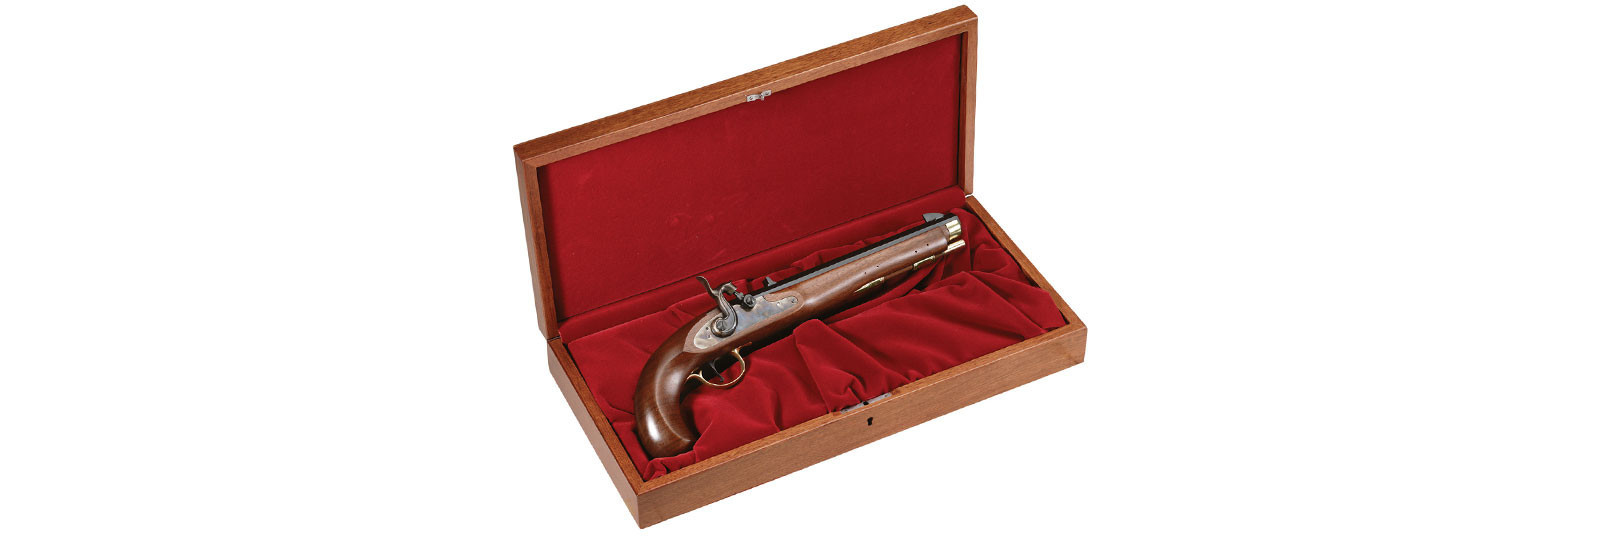 Kentucky Pistol percussion model with case